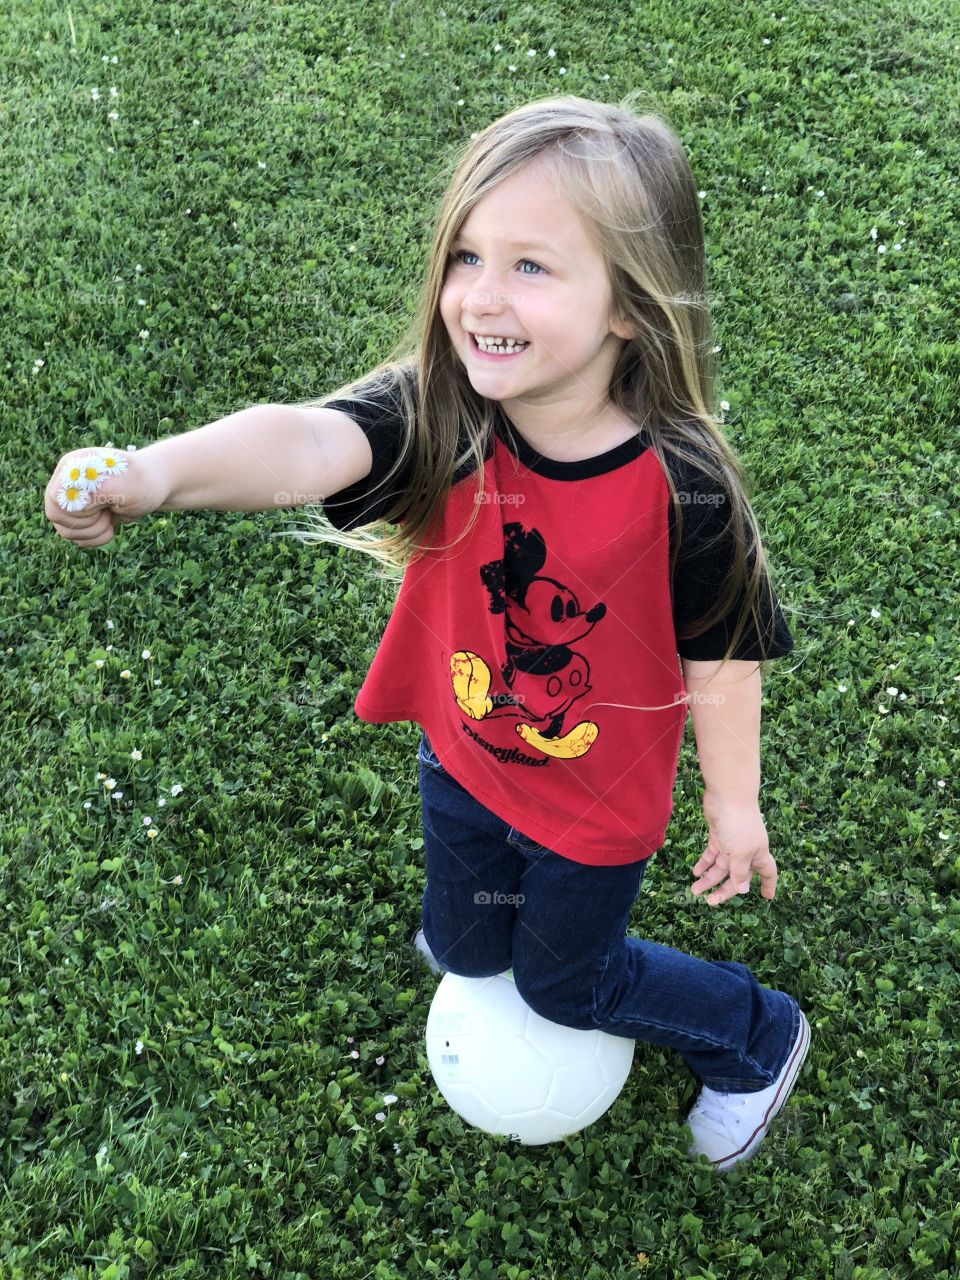 Little blue eyed girl with long blond hair stopping to show a handful of daisies kneeling on a soccer ball